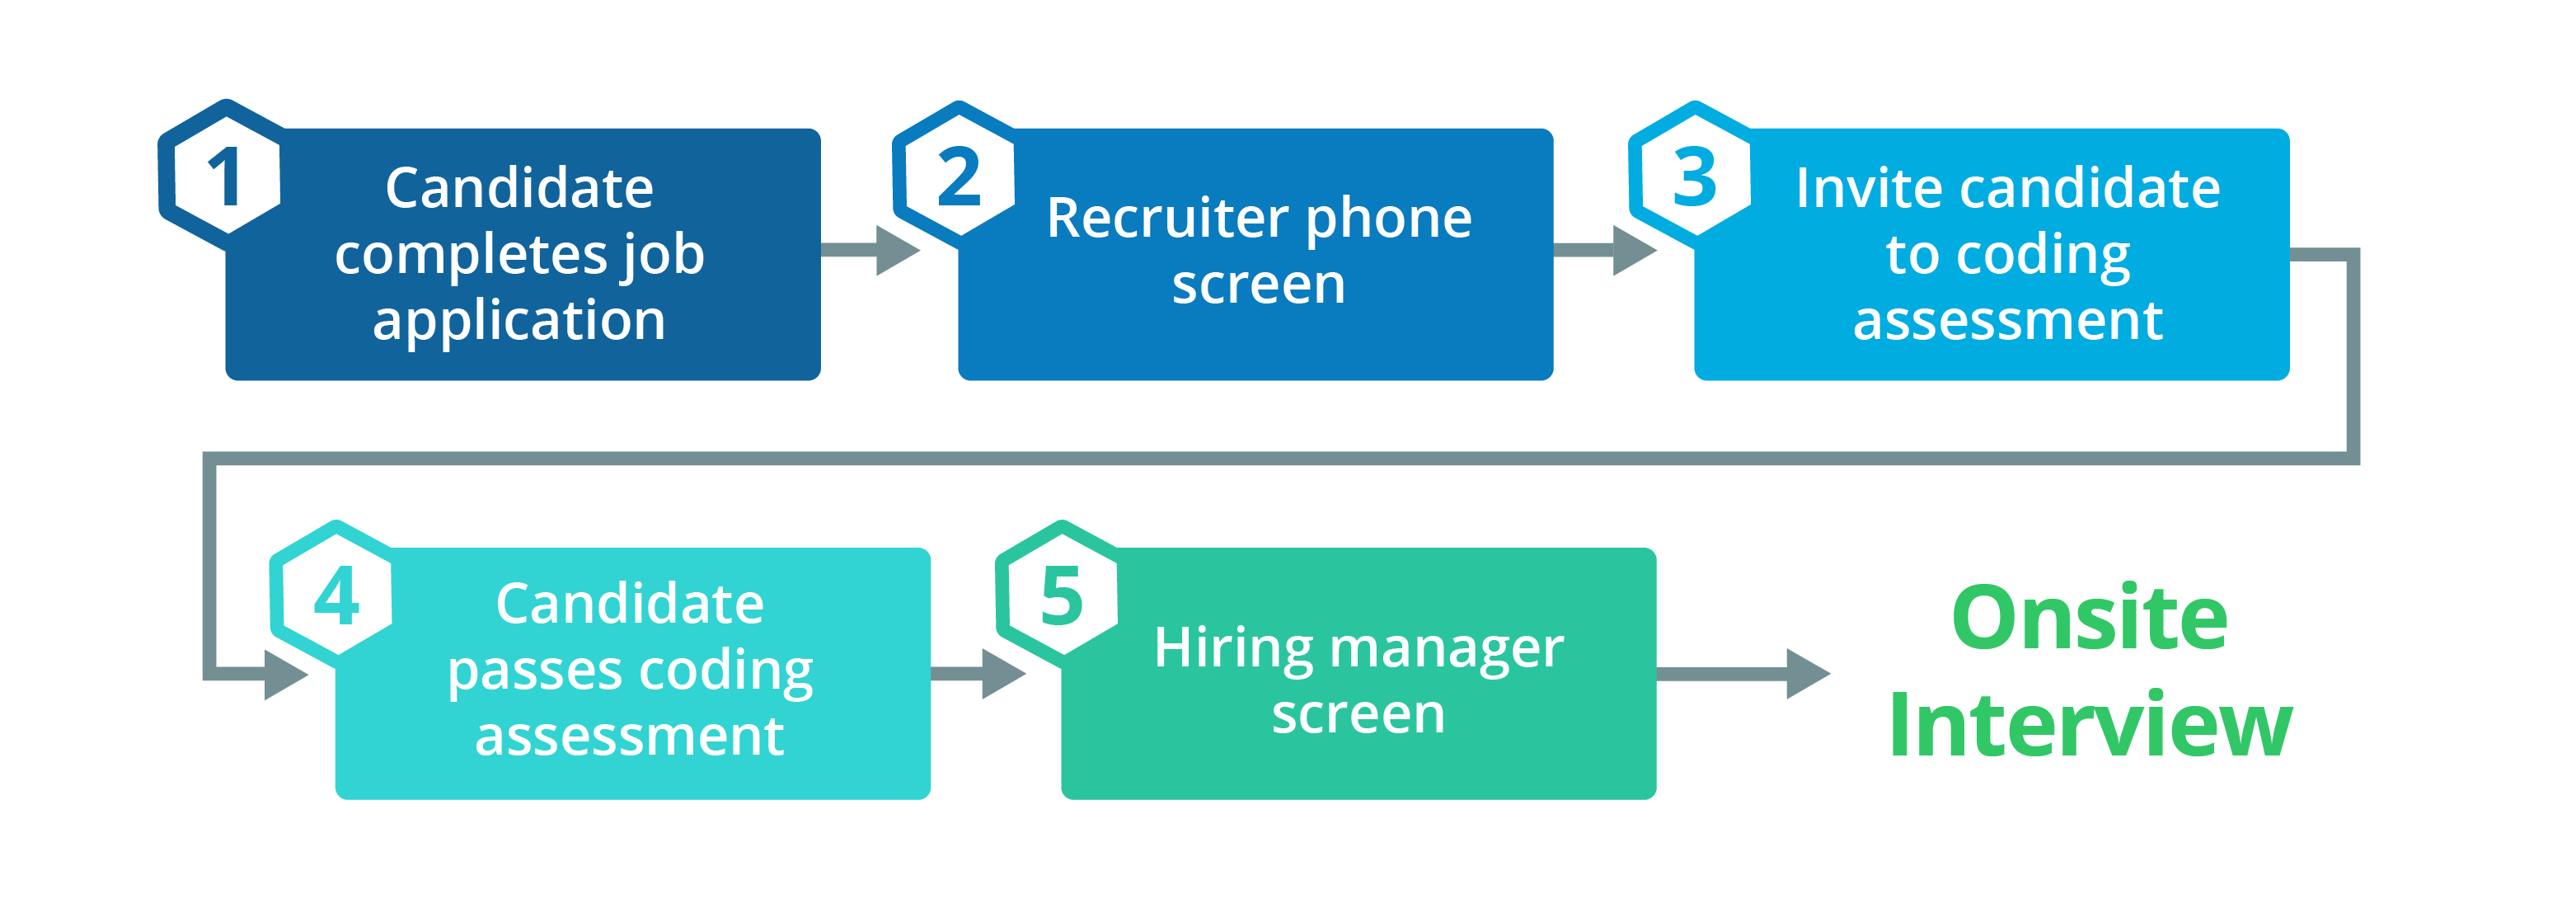 candidate-engagement-workflow-2